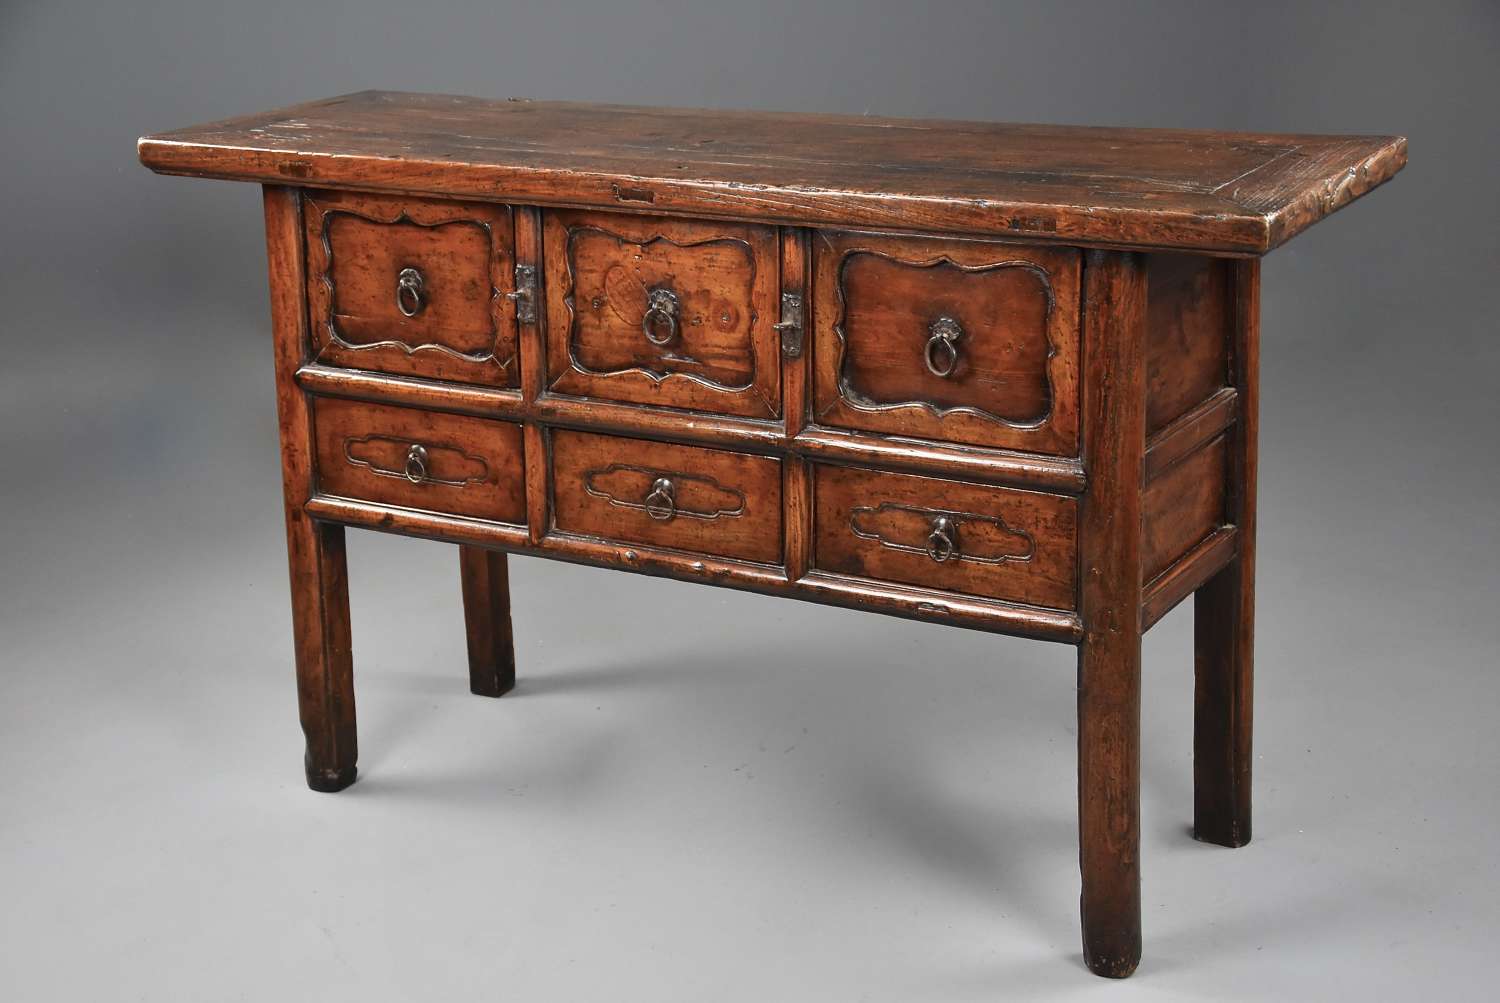 19th century Chinese elm dresser or sideboard of fine patina